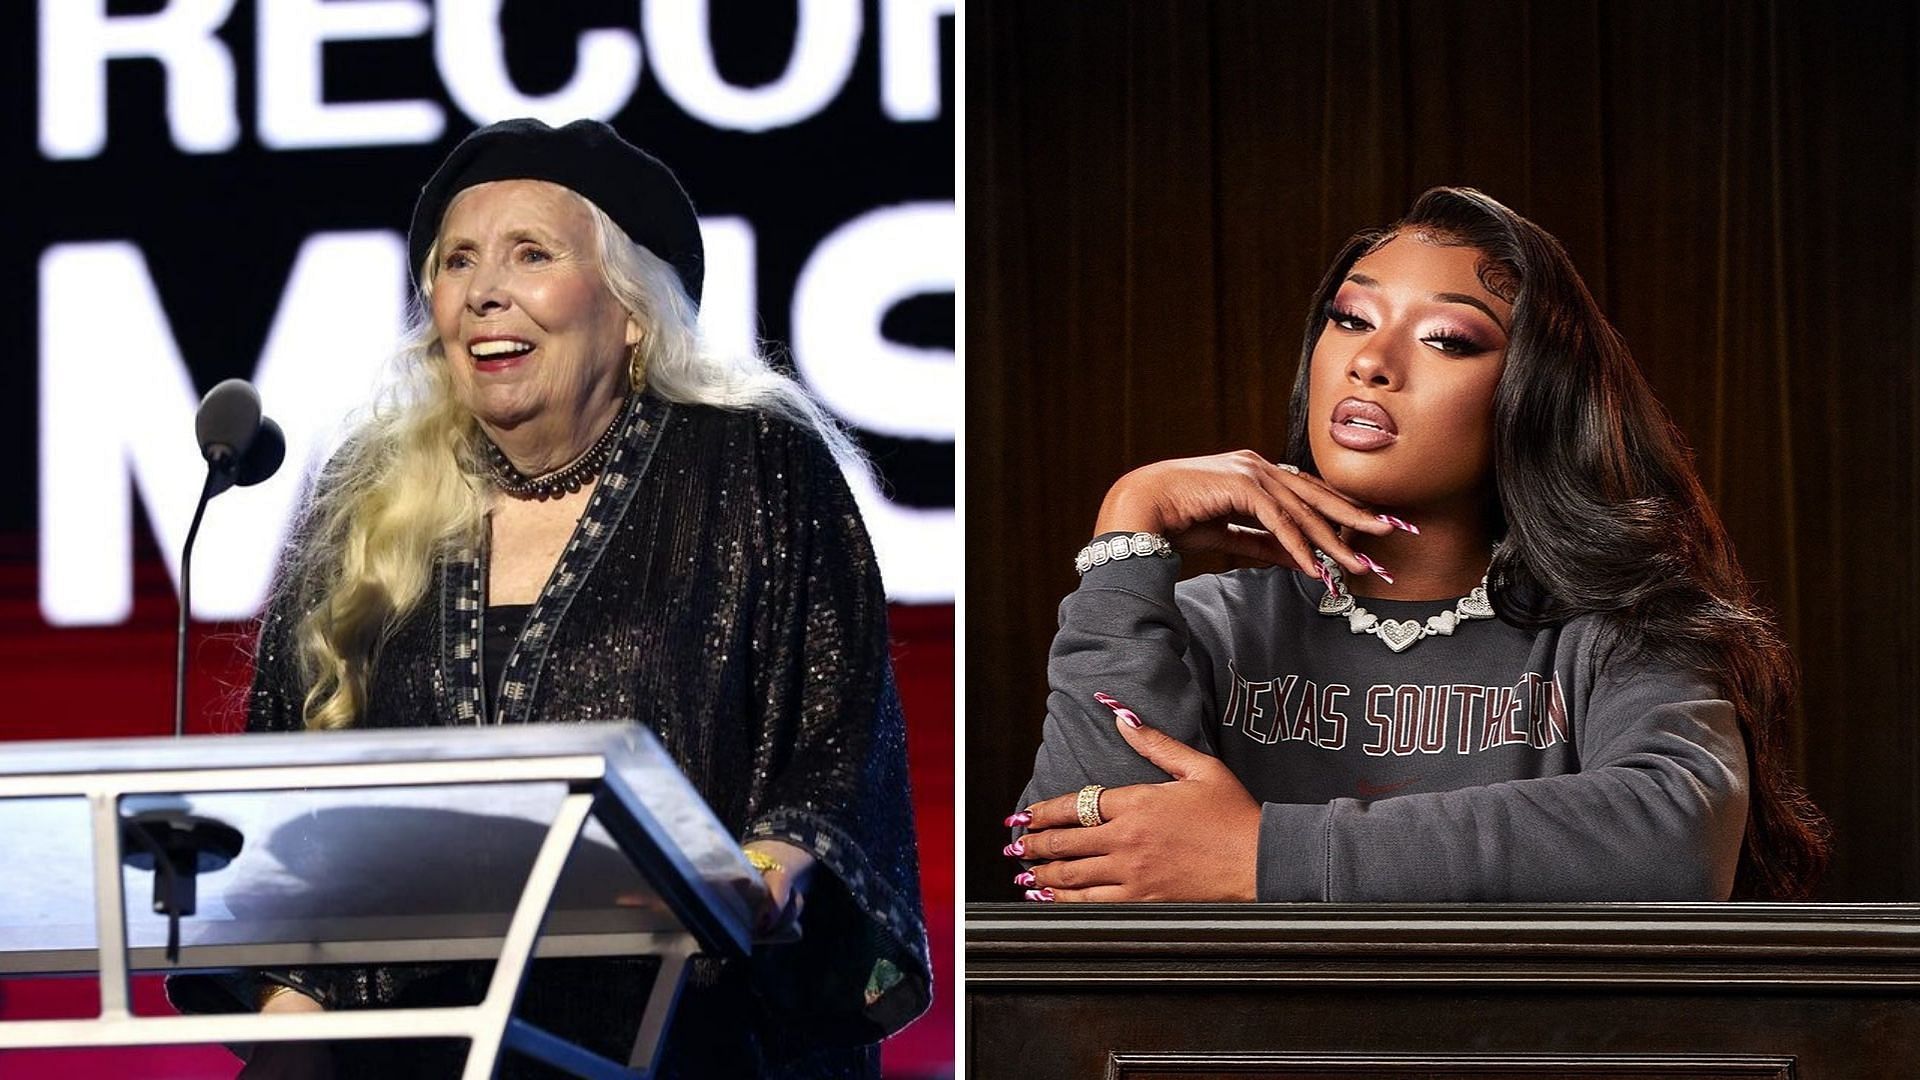 From Joni Mitchell to Megan Thee Stallion, a host of presenters are going to take the stage at the 2022 Grammy Awards (Image via Instagram/@musicares &amp; @theestallion)